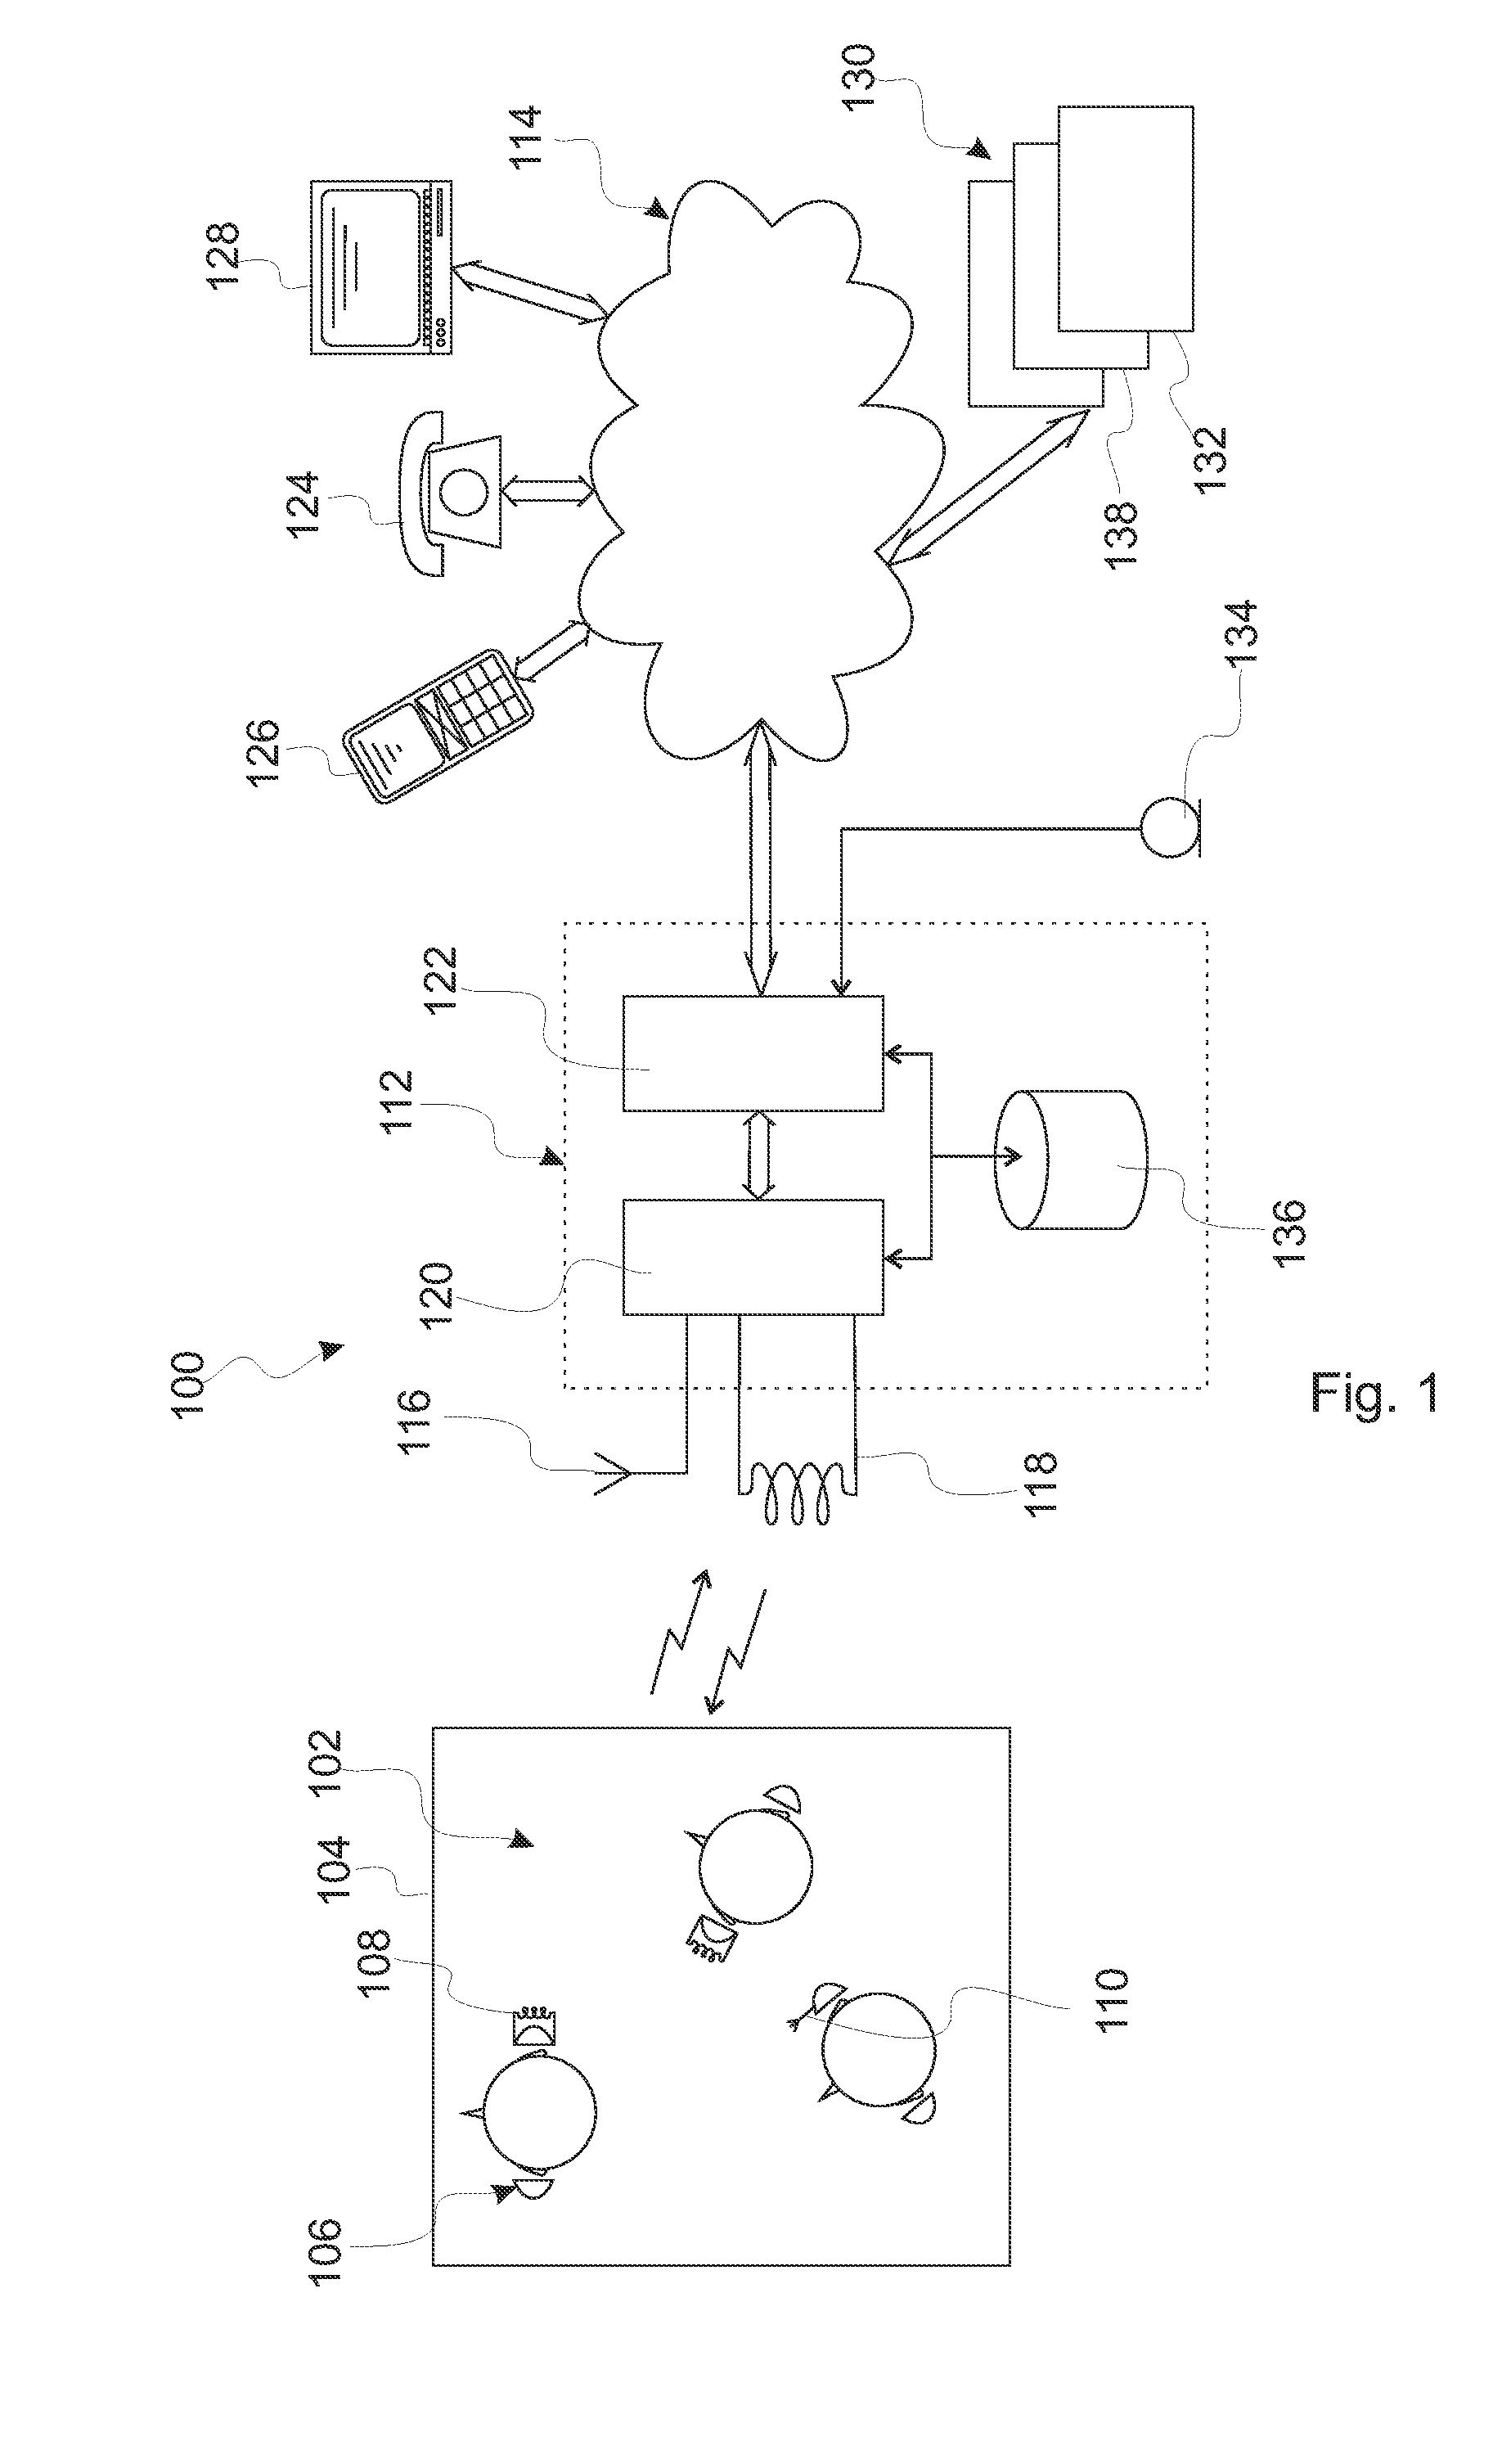 System and method for sharing network resources between hearing devices